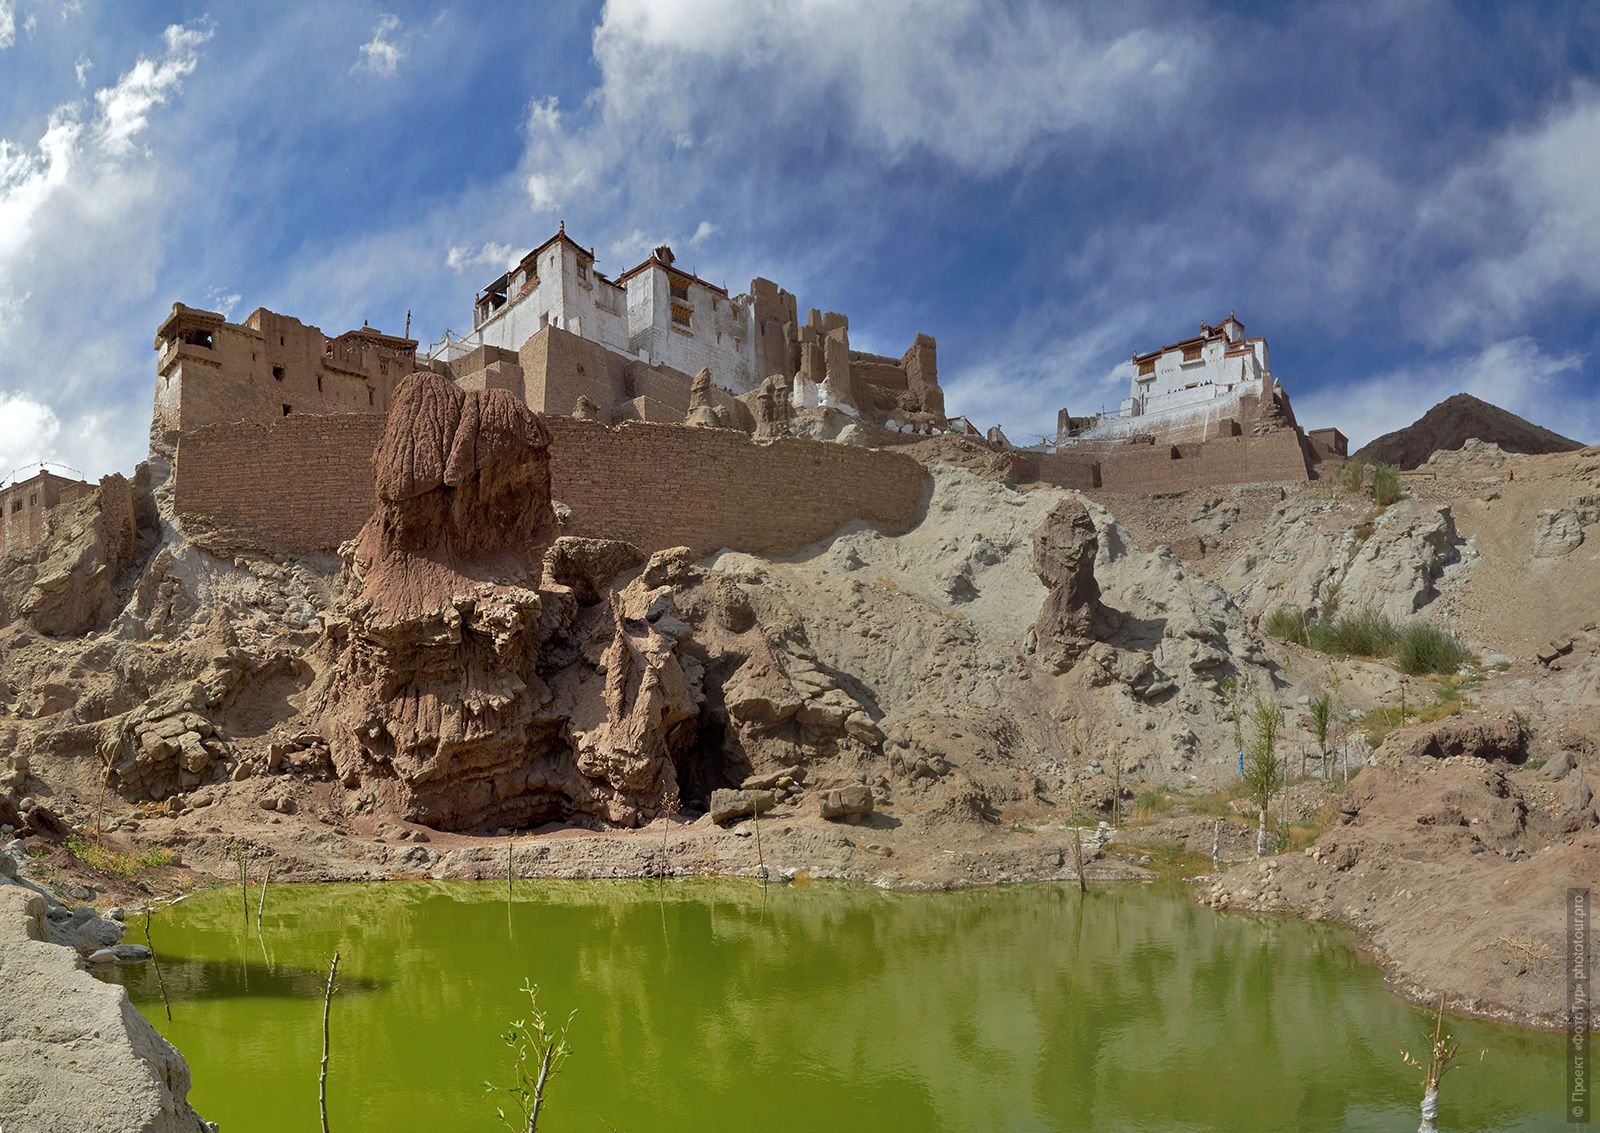 The Basco Monastery. Tour for artists in Tibet: Watercolor-1: Watercolor painting in Ladakh with Pavel Pugachev, 04.08. - 13.08. 2019.